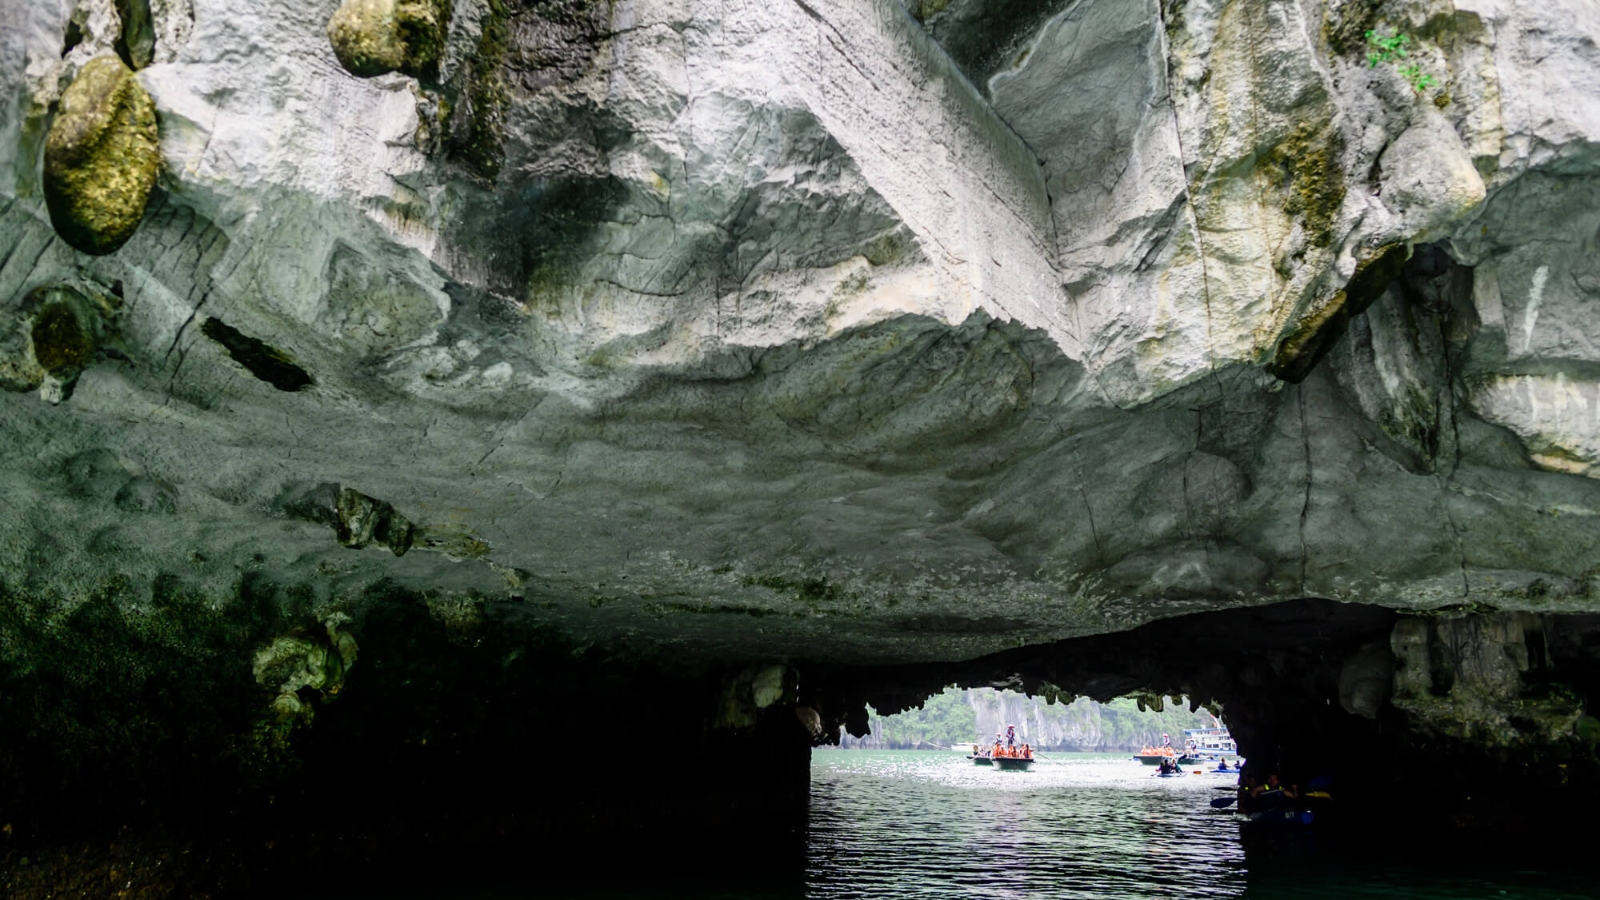 An incredible Luon Cave with a shape like an arched gate